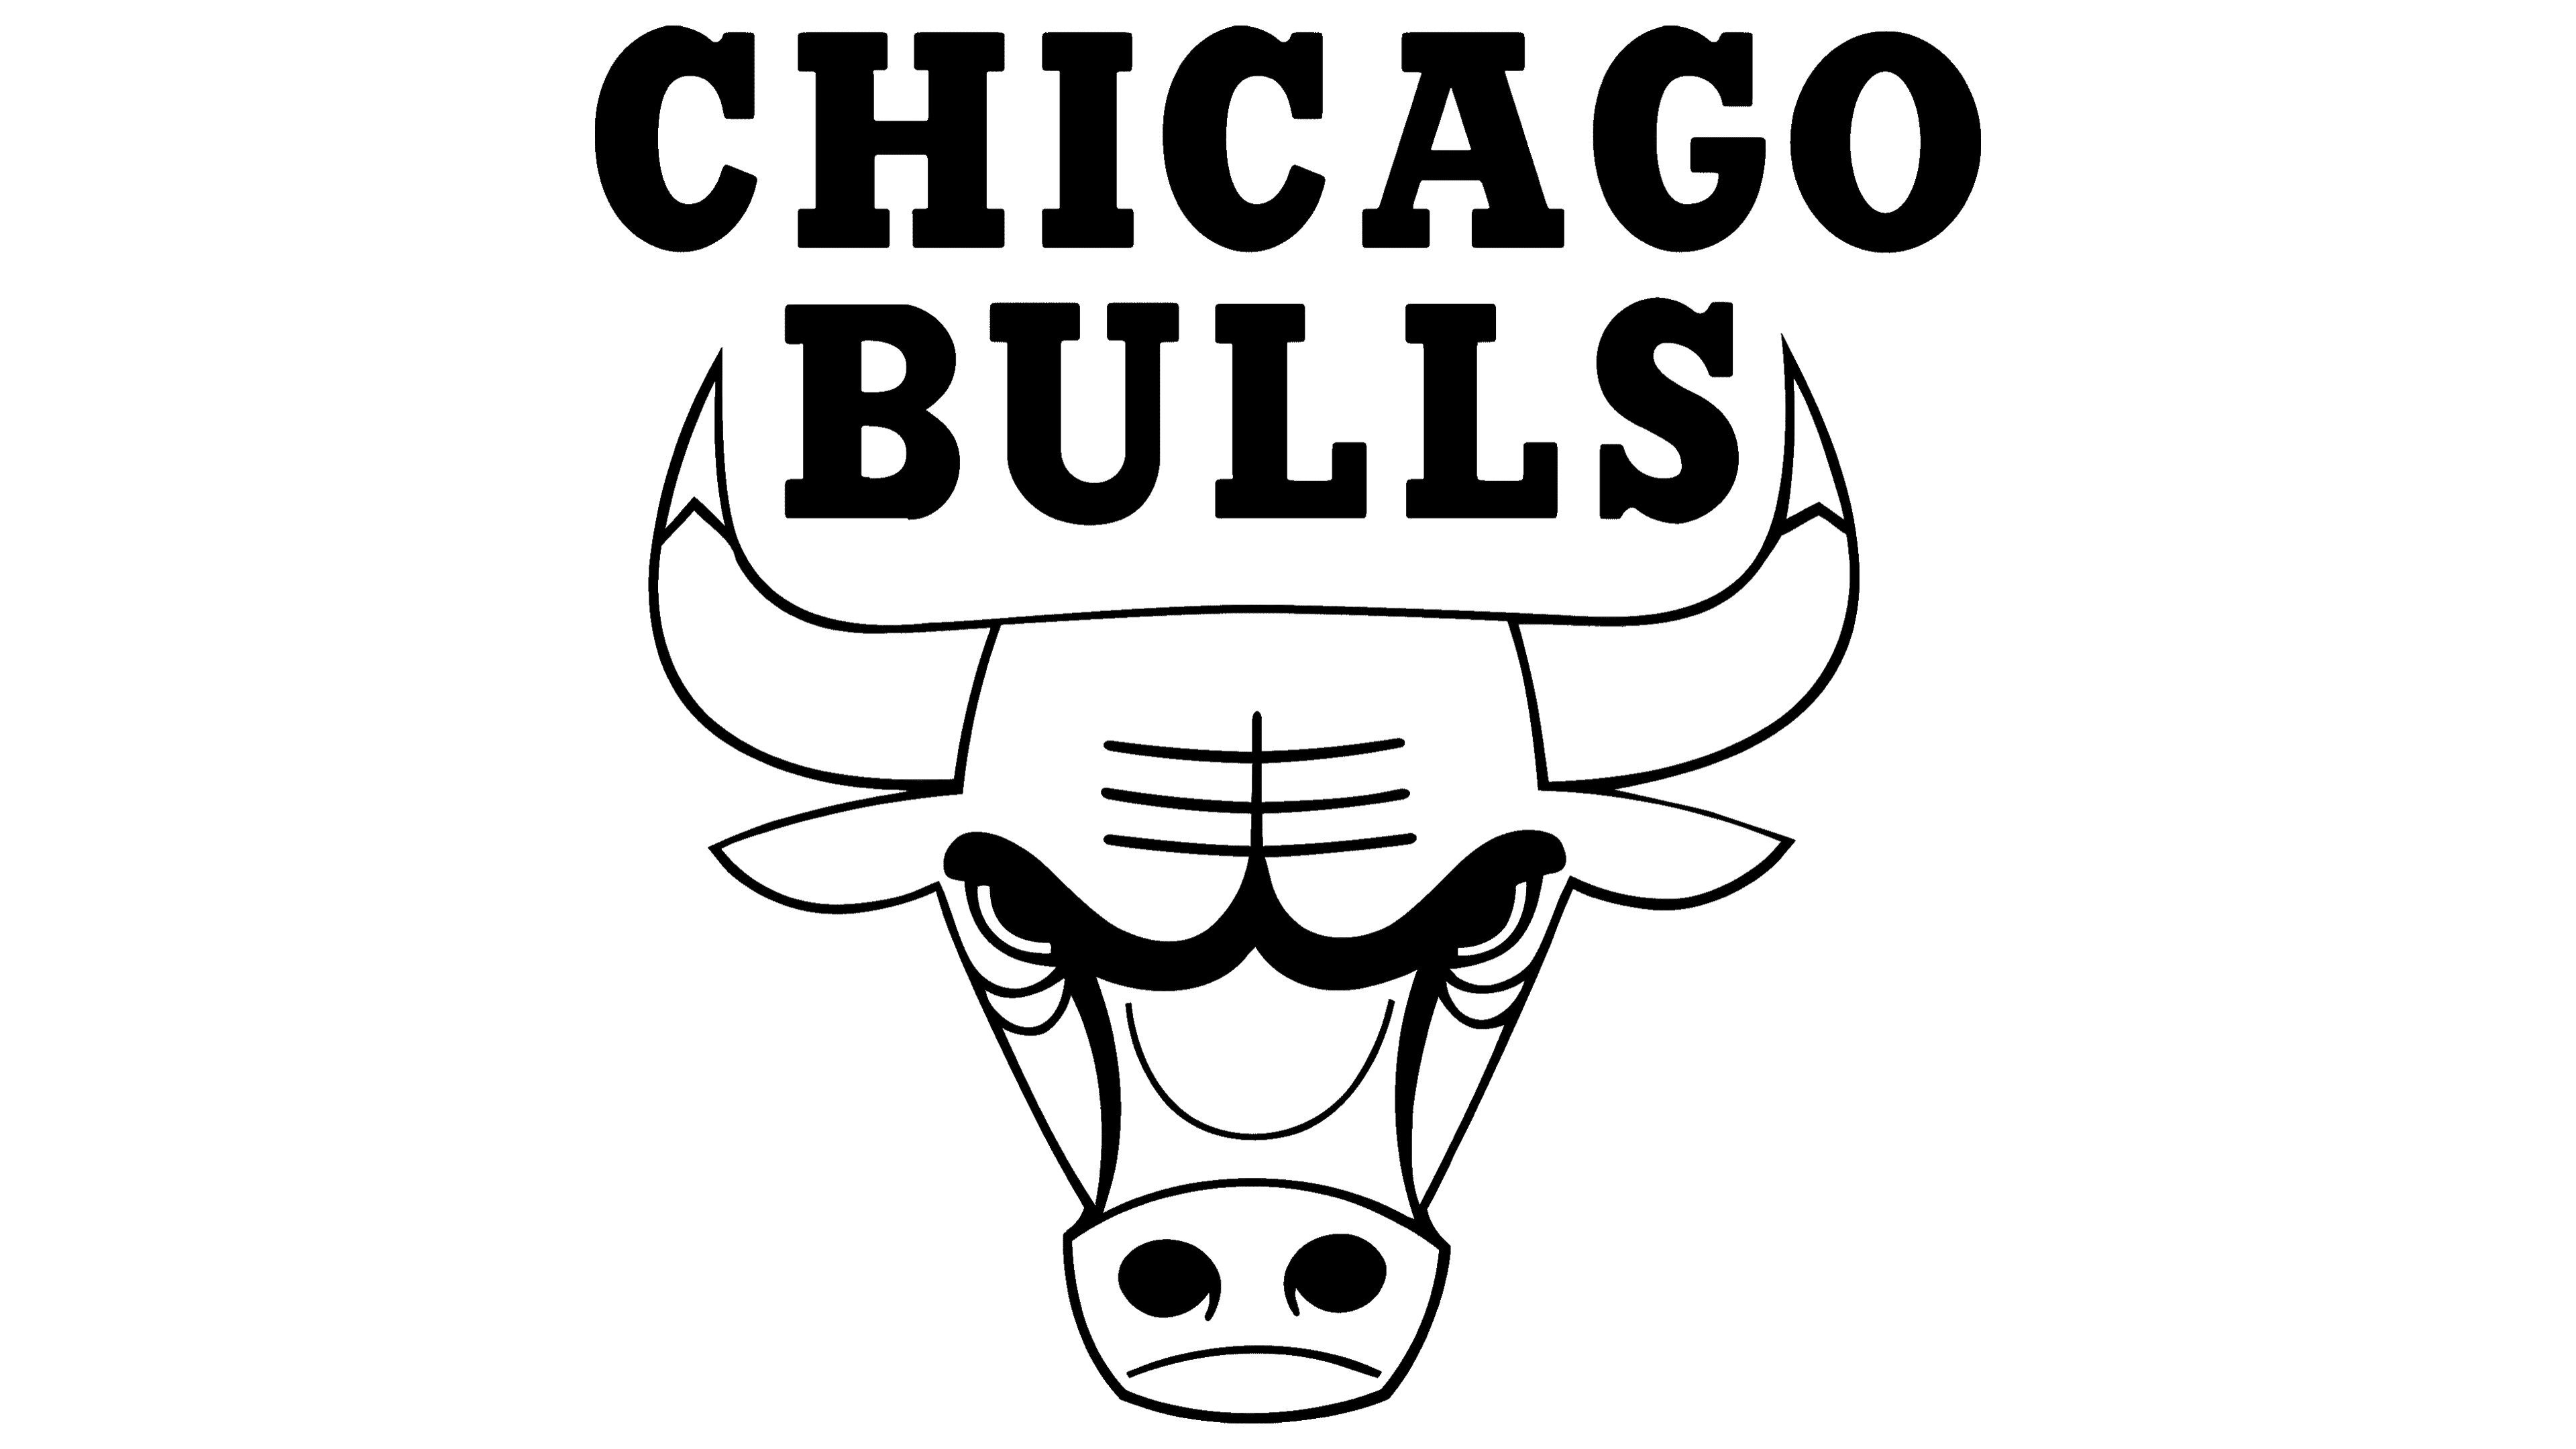 Chicago Bulls Logo and sign, new logo meaning and history, PNG, SVG ...